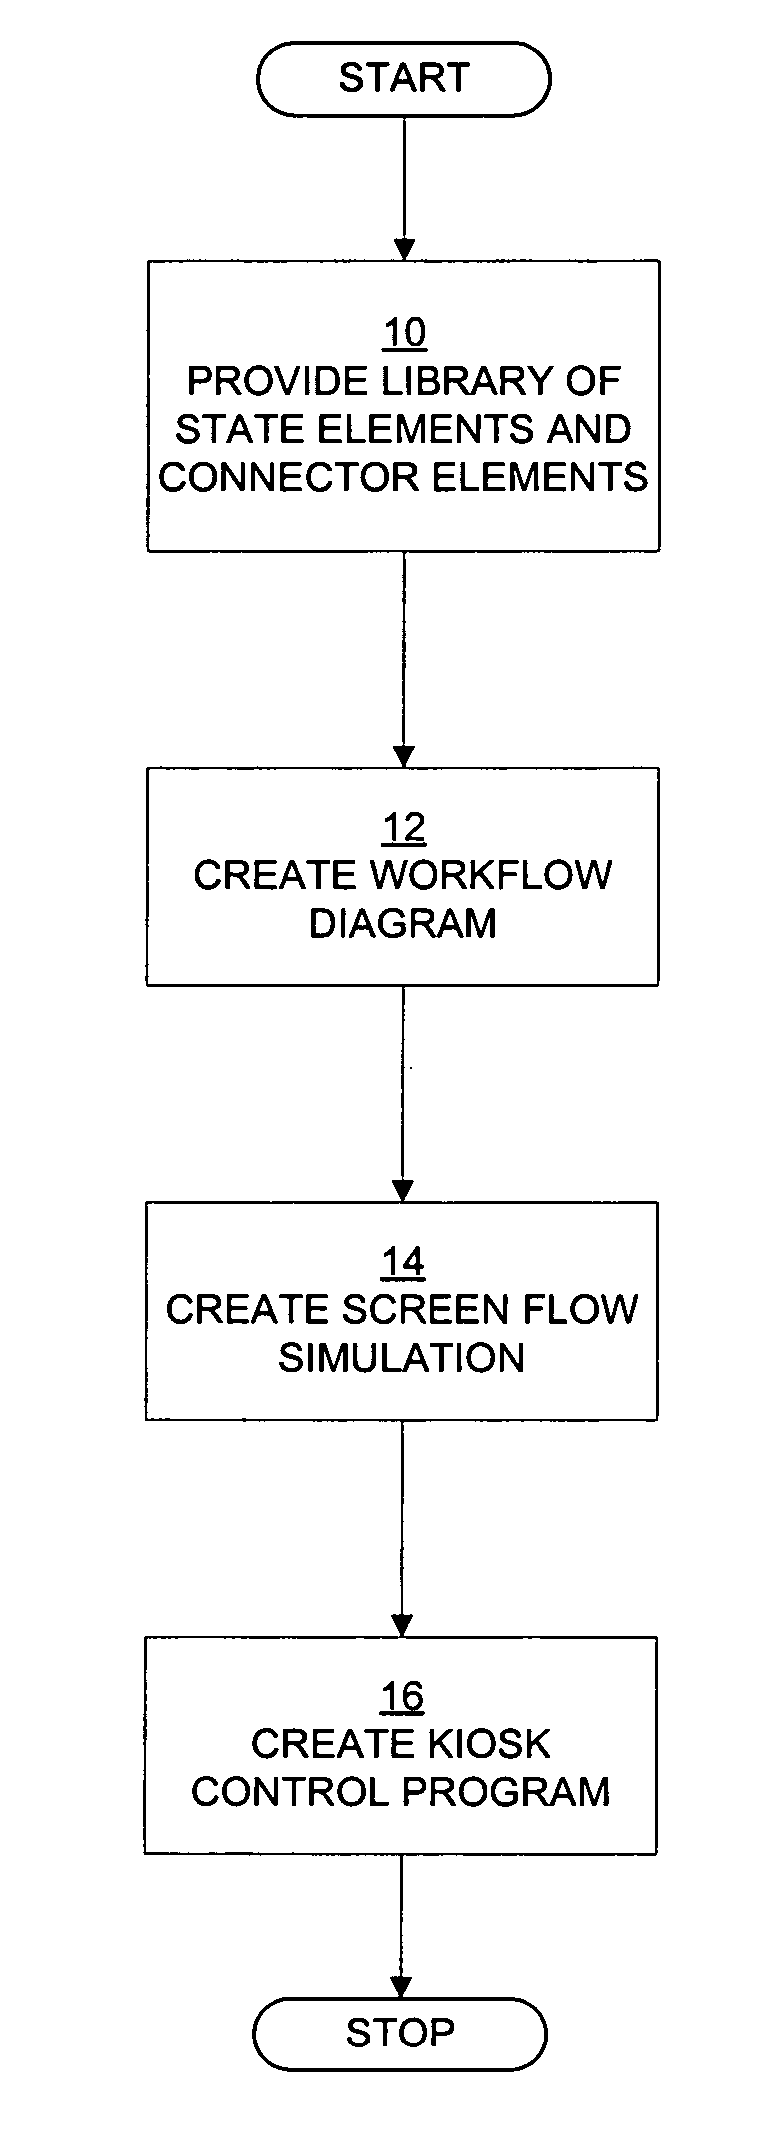 System, method, and computer program product for graphically generating a program for controlling the operation of a kiosk